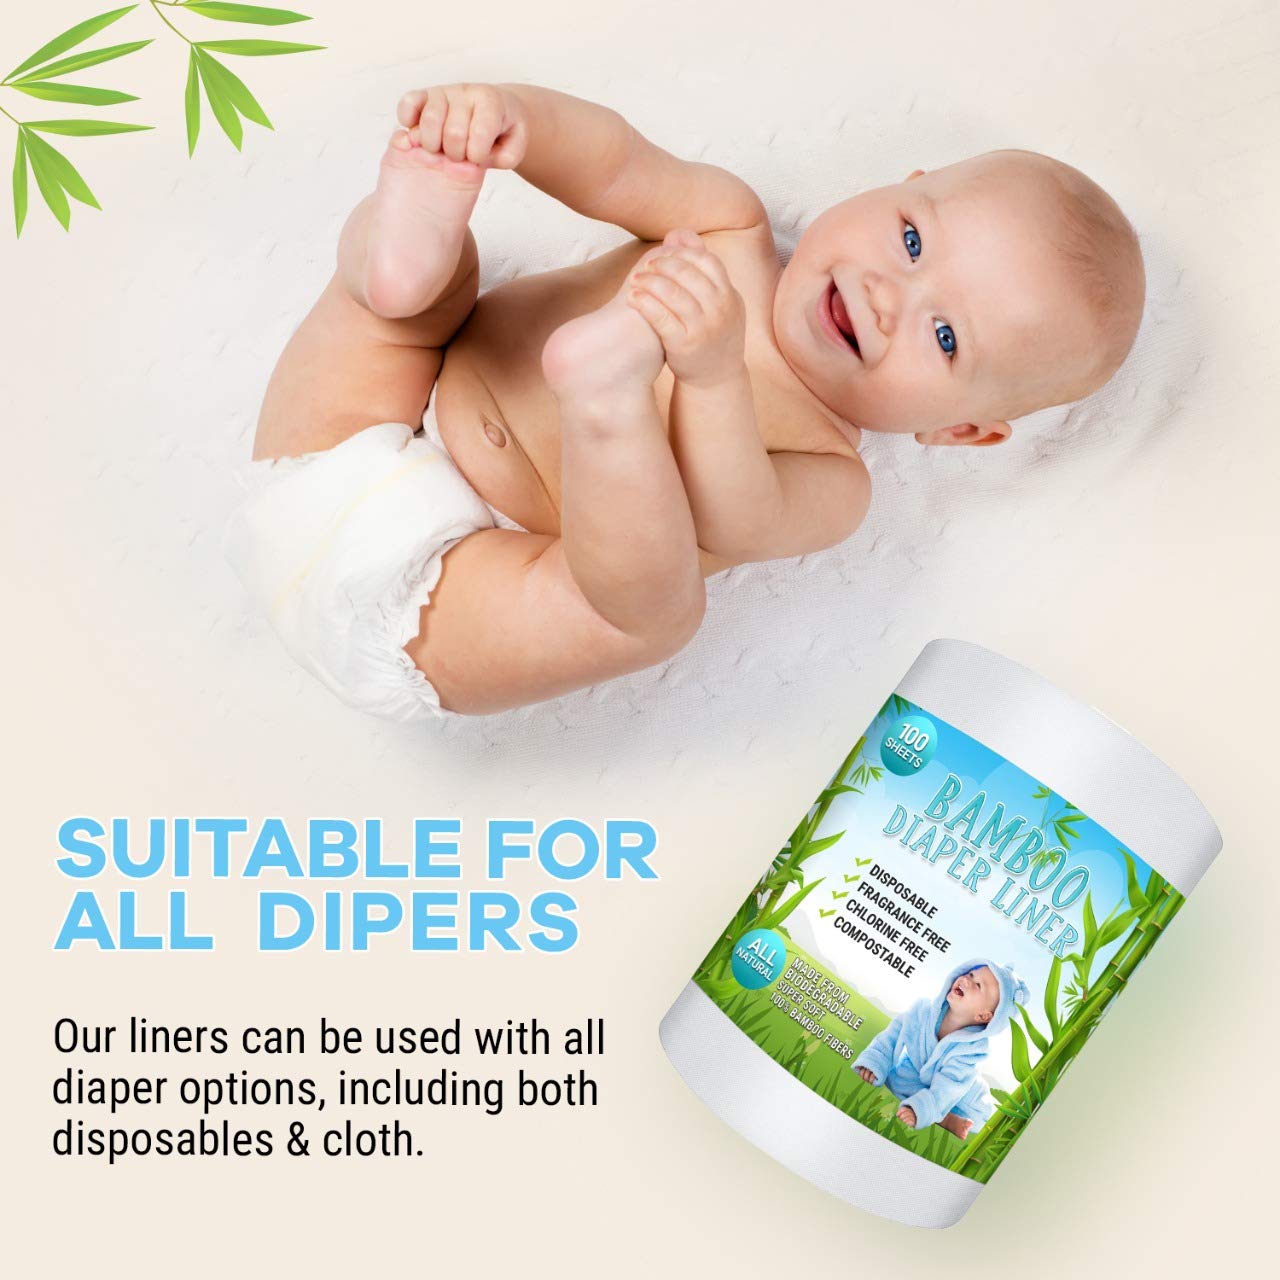 Disposable Cloth Bamboo Diaper Liners - Eco-Friendly, Fragrance Free & Chlorine Free, Flushable Biodegradable Reusable Liners For Cloth Diaper 100 Sheets Per Roll